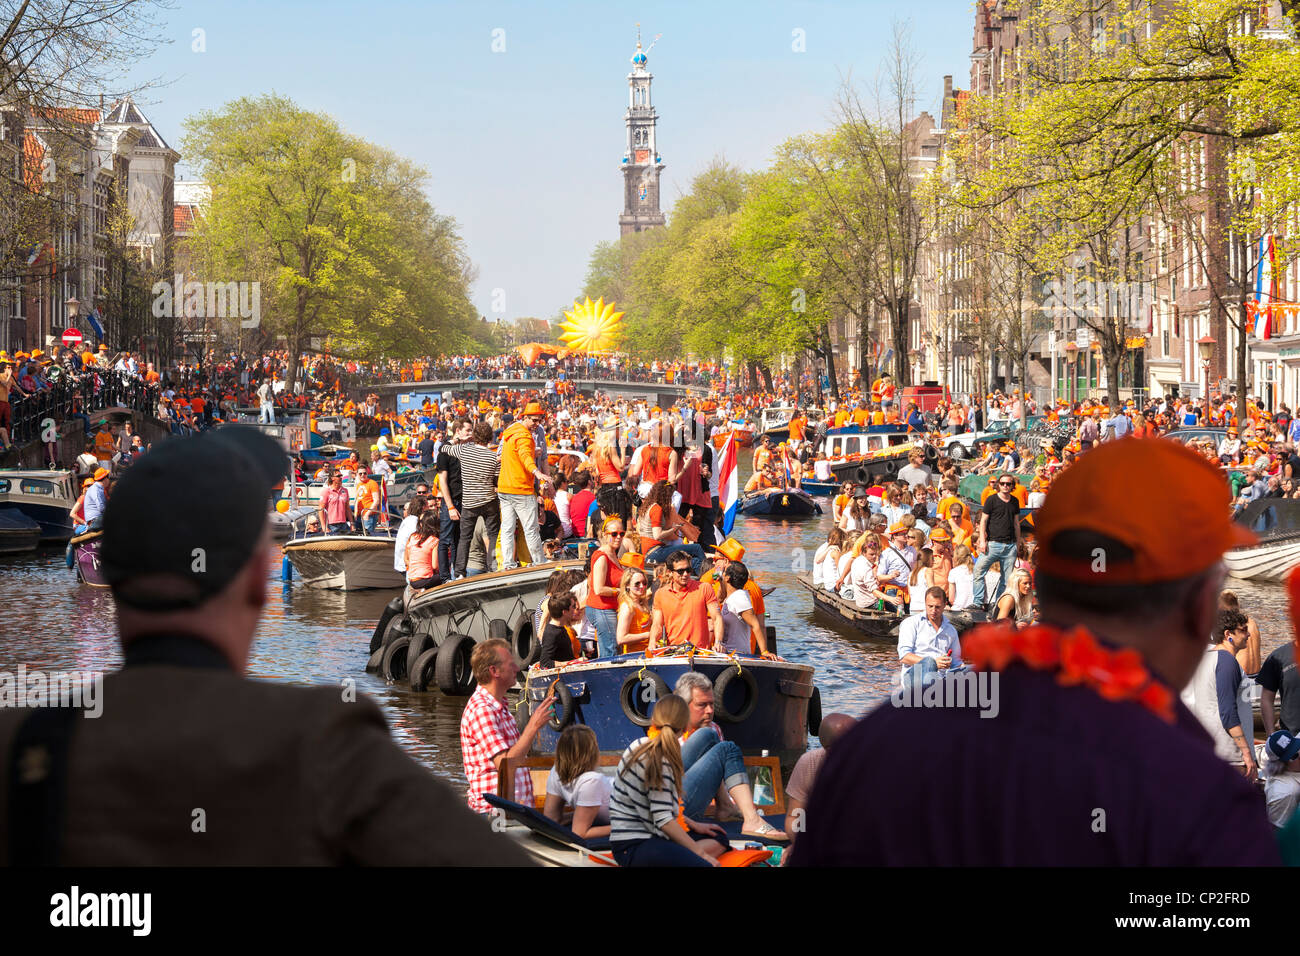 Kingsday Kings giorno King's Day in Amsterdam. Canal Parade in Prinsengracht. Barche di persone che indossano arancione, partying. Foto Stock